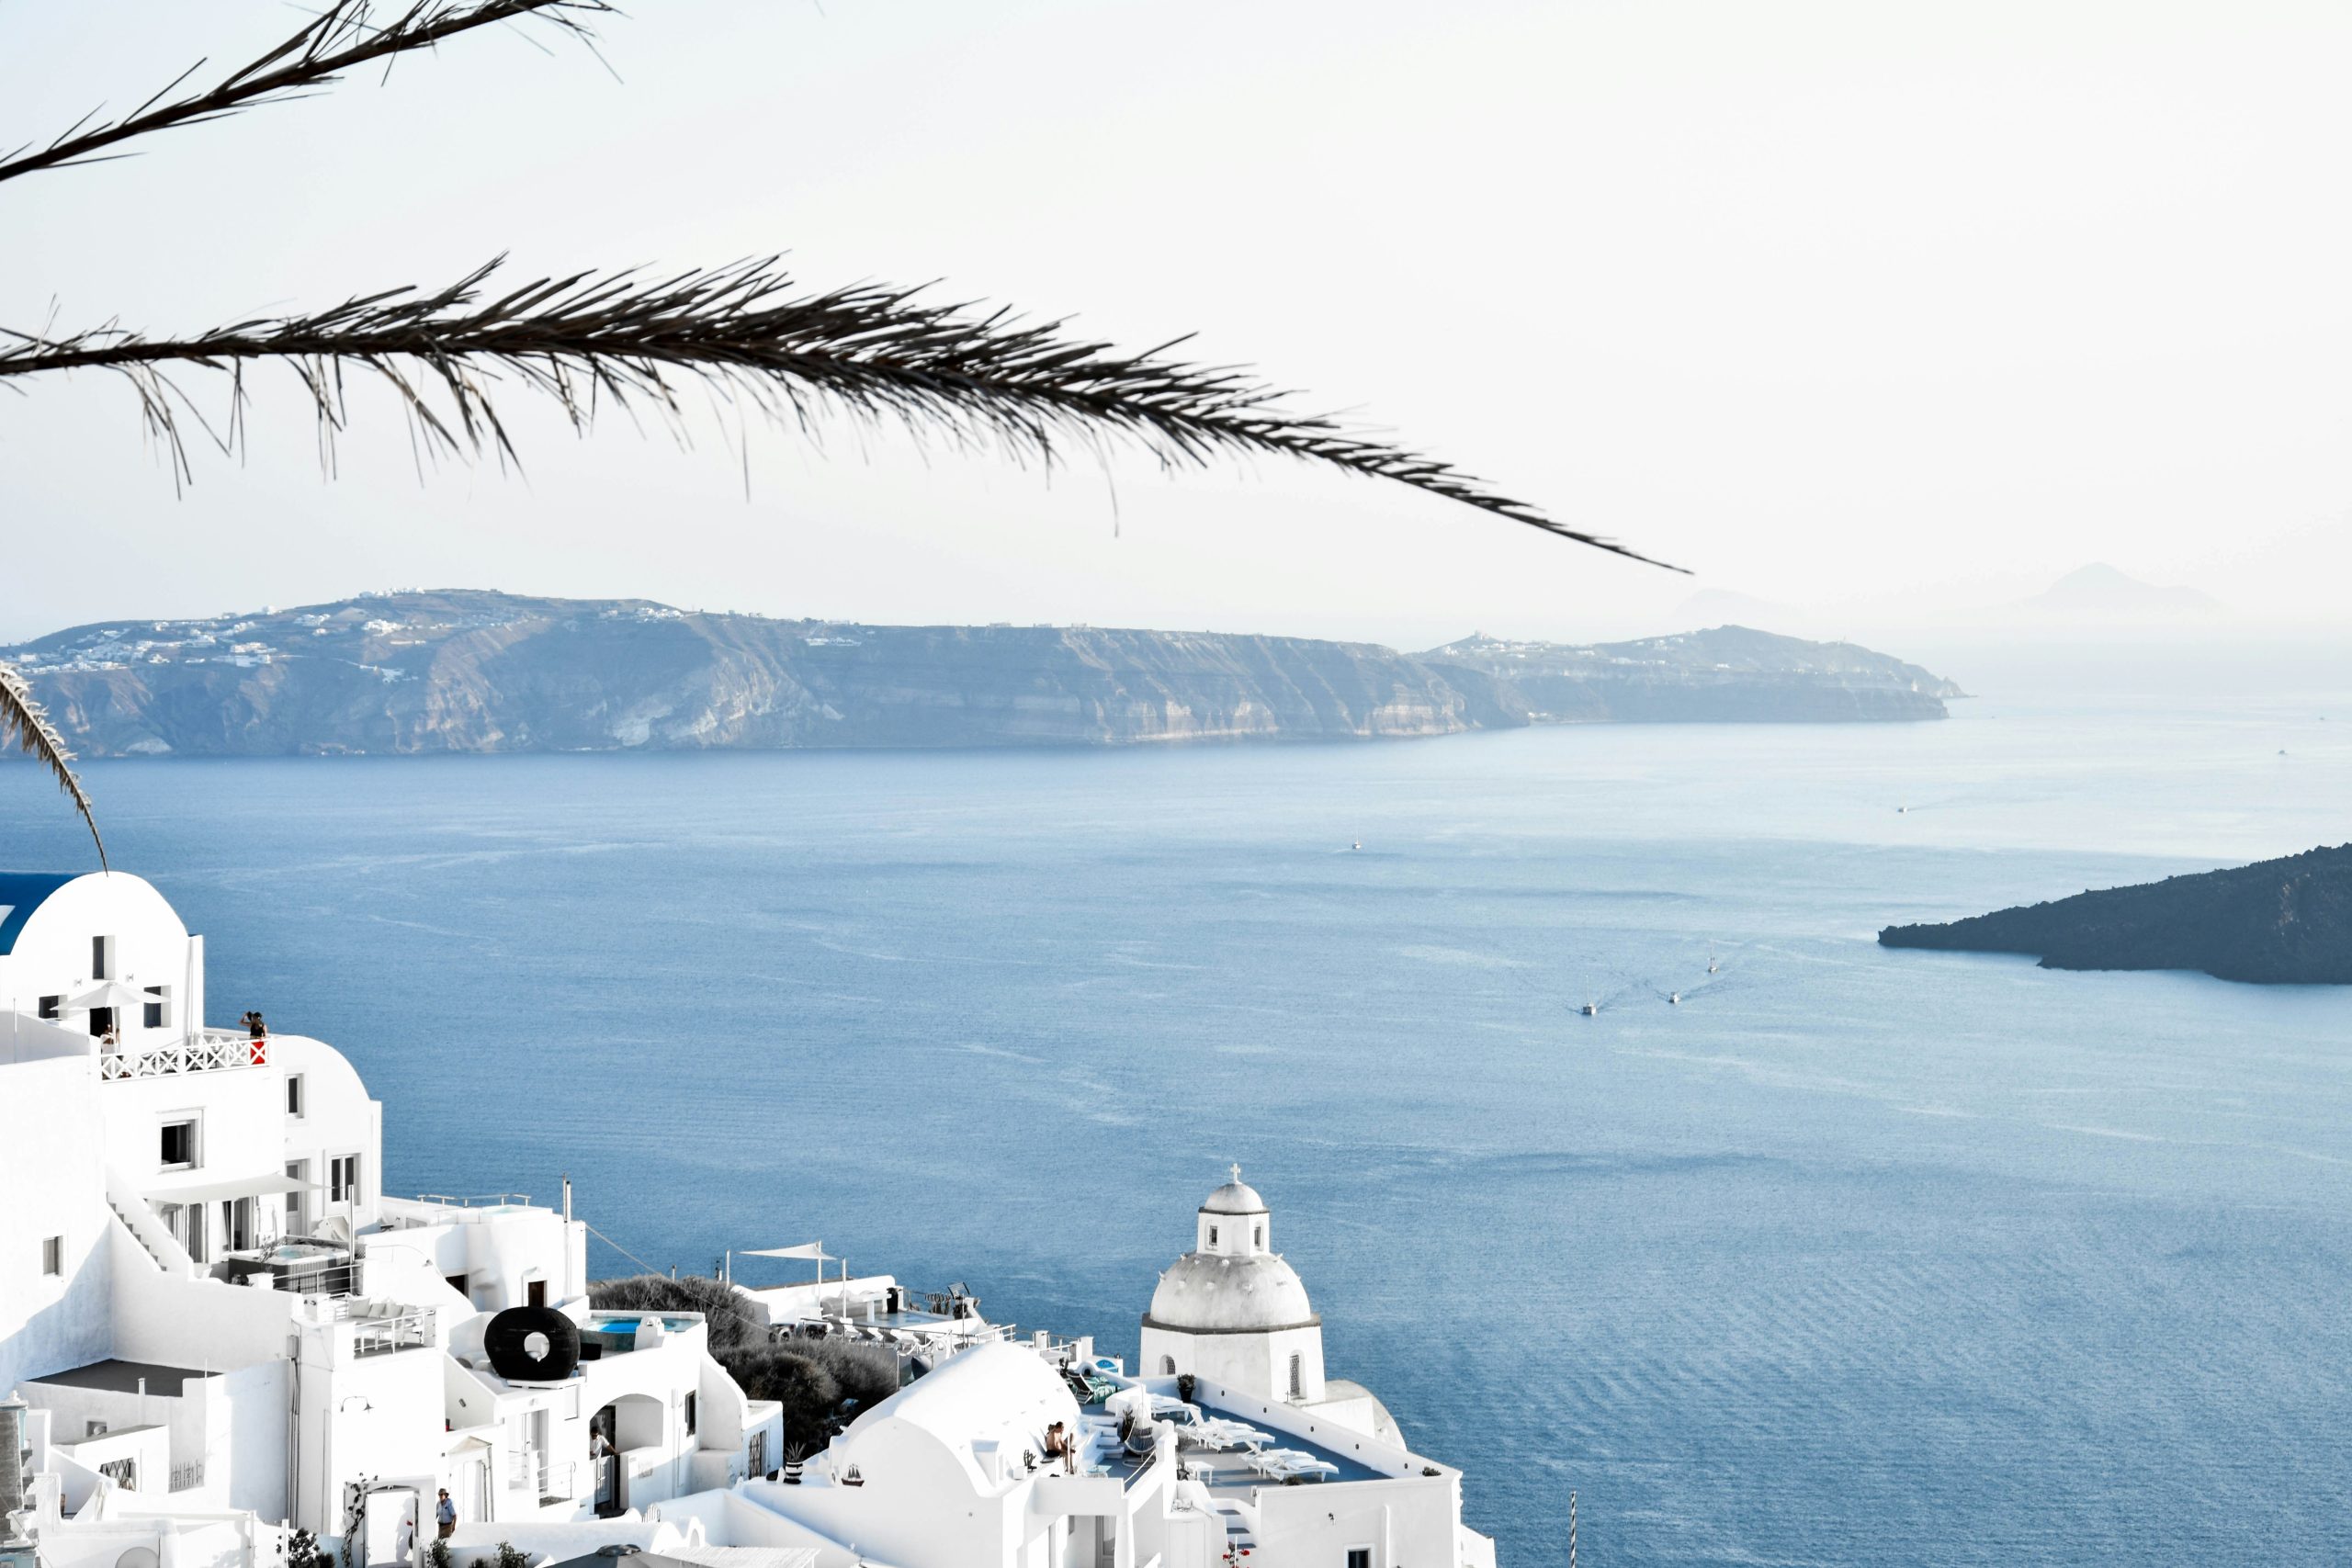 explore the beautiful greek islands on a luxurious cruise. discover stunning views, delicious cuisine, and rich history on greek island cruises.